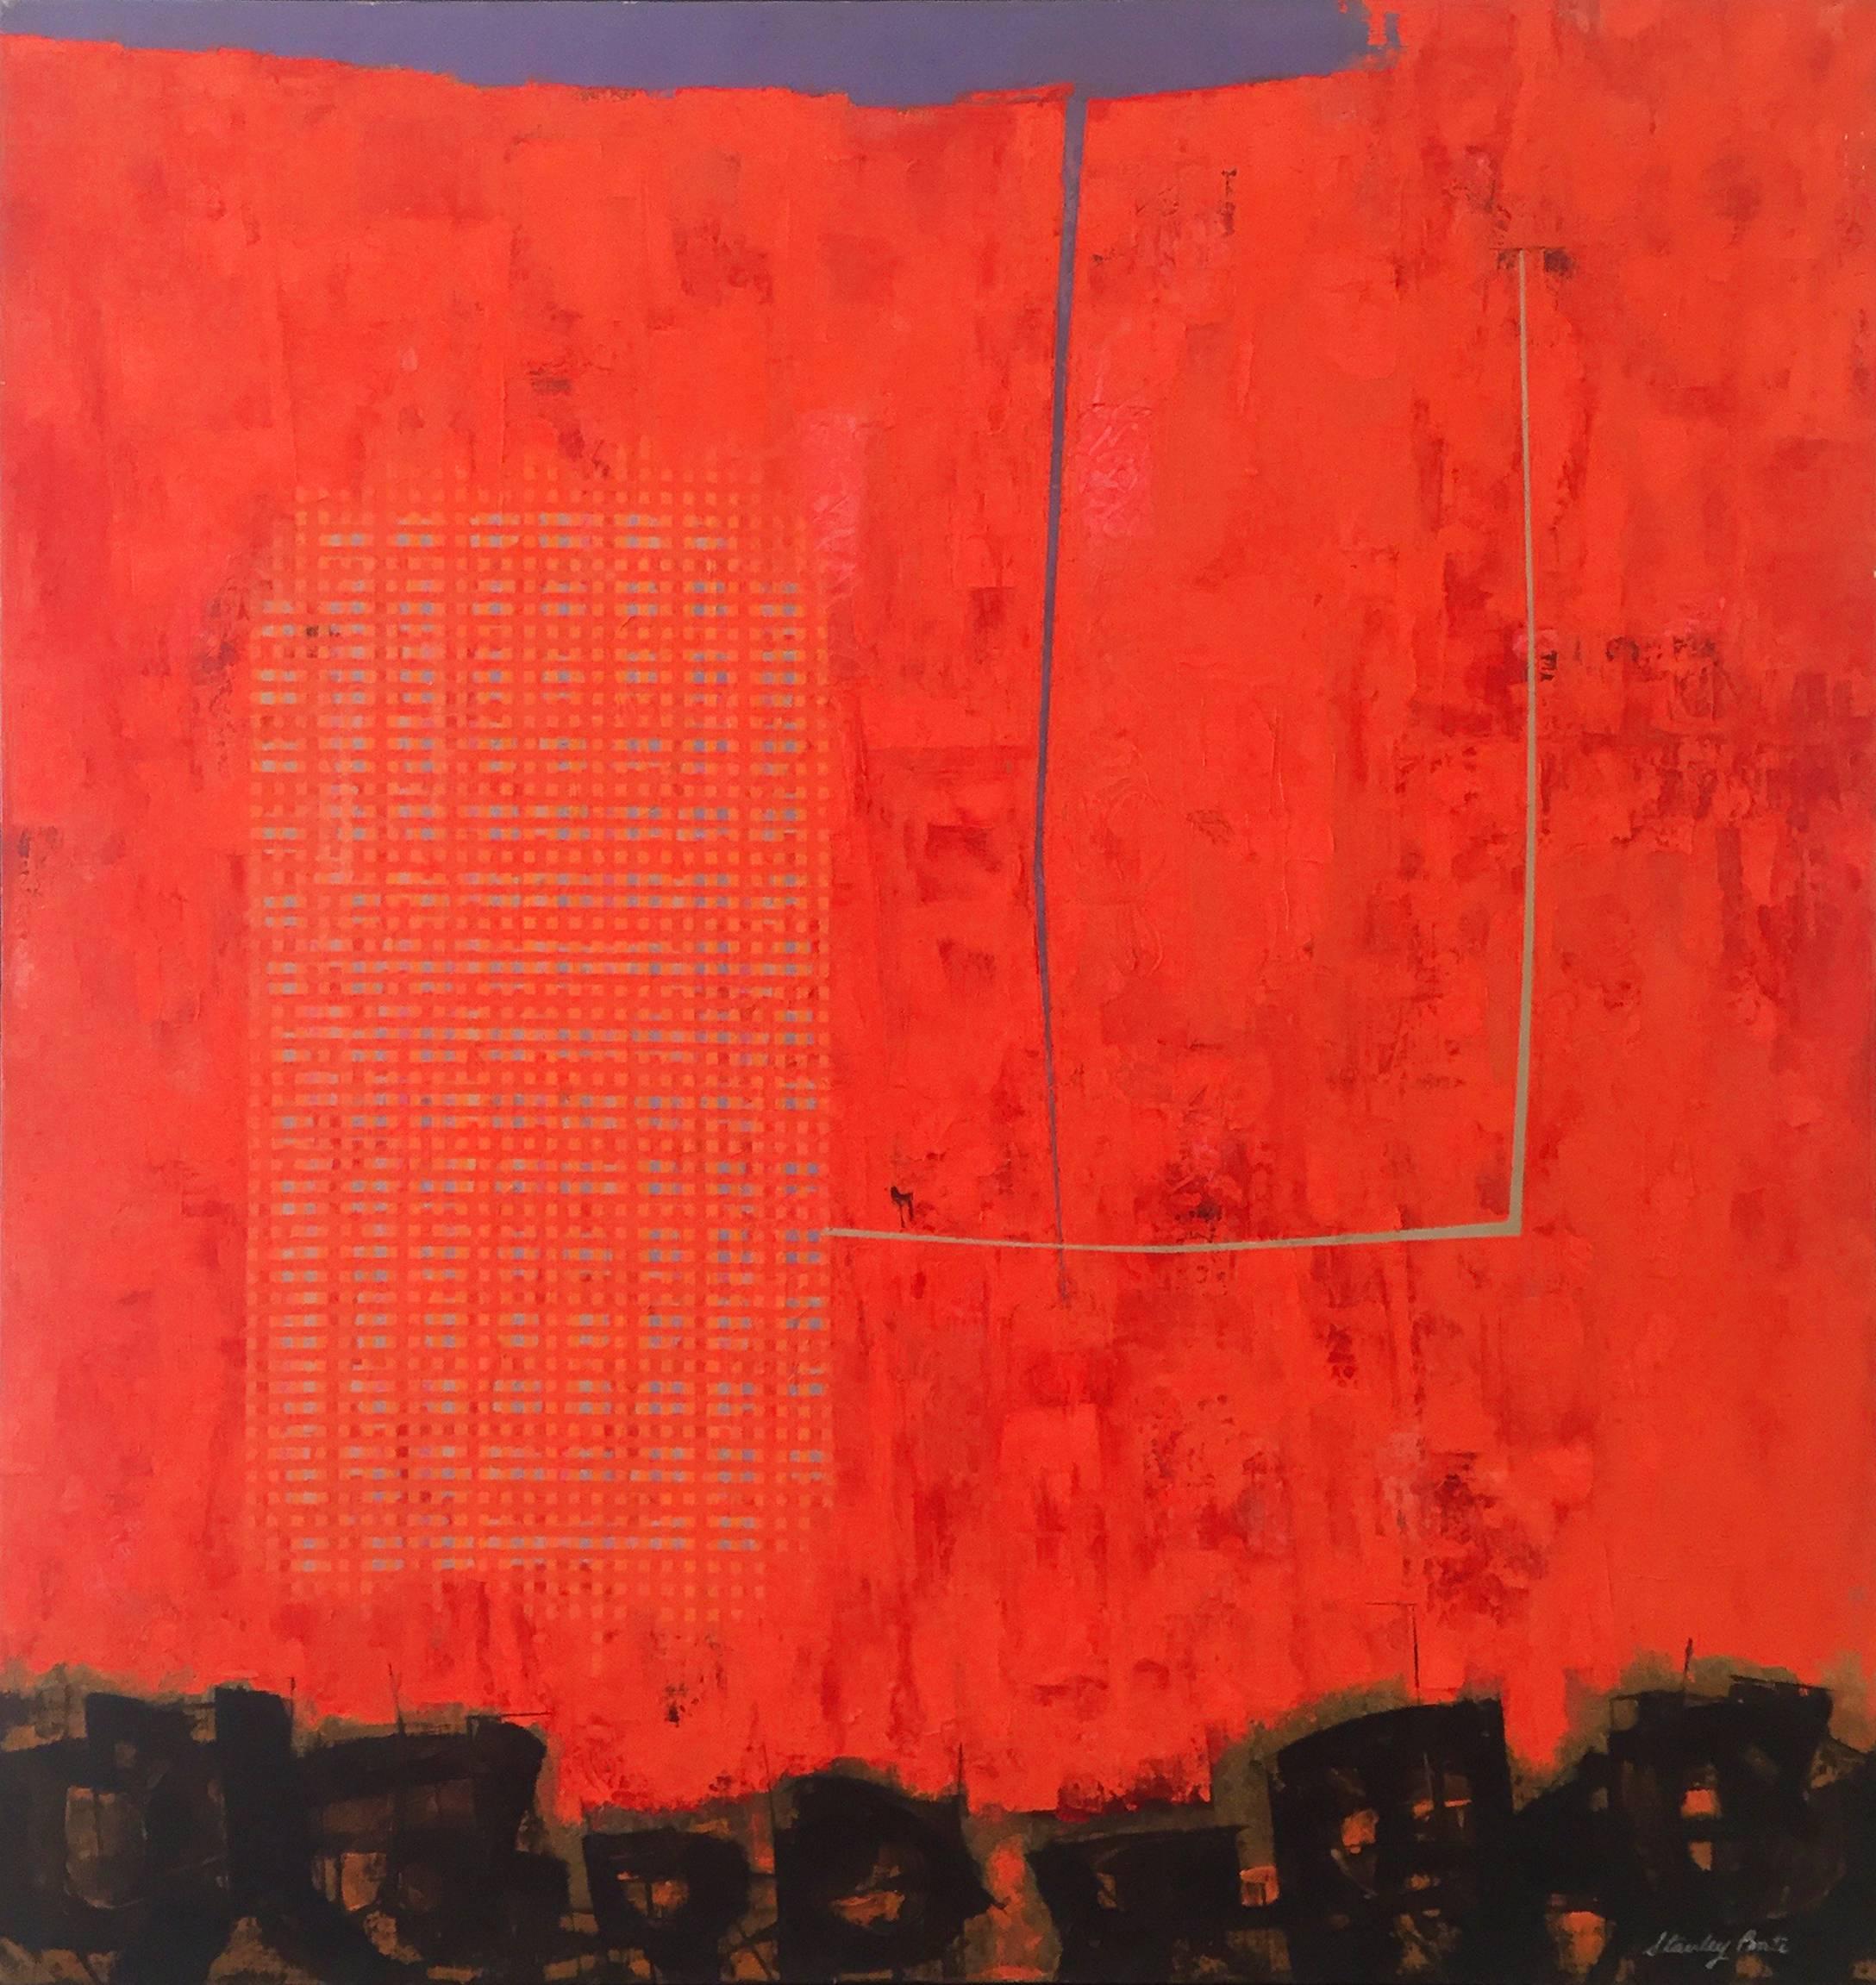 This original Modern abstract painting by Stanley Bate is made with oil paint on canvas, and was painted circa 1960. It features a bold, vibrant red hue, with dark shapes lining the bottom of the composition, as well as abstracted lines and dotted